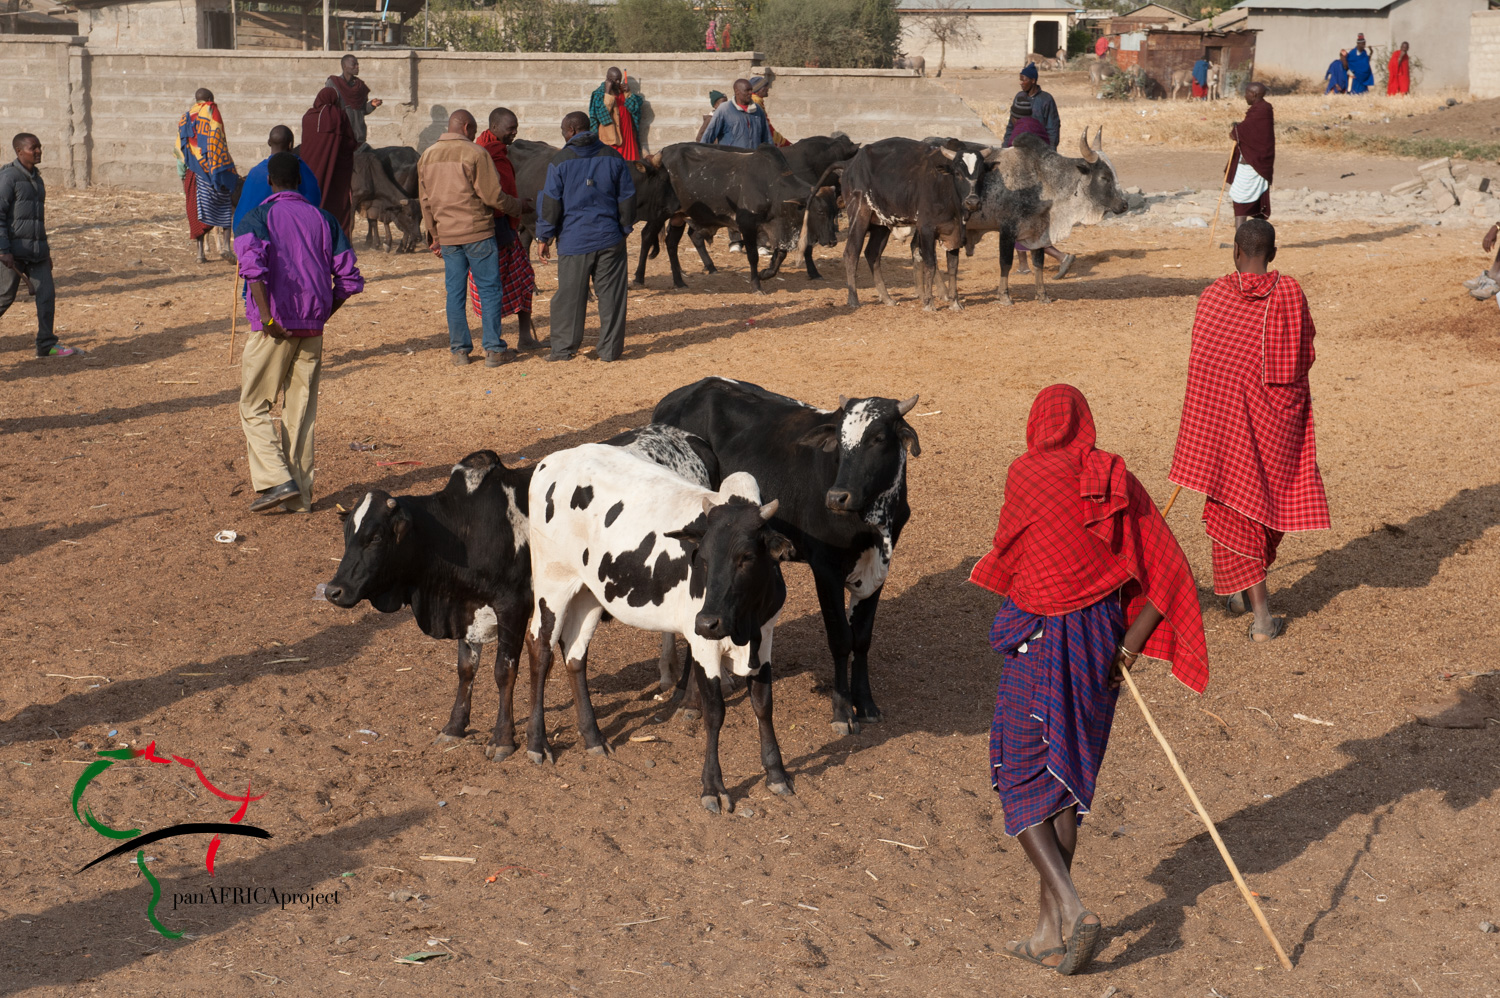 People from the Maasai tribe with cattle